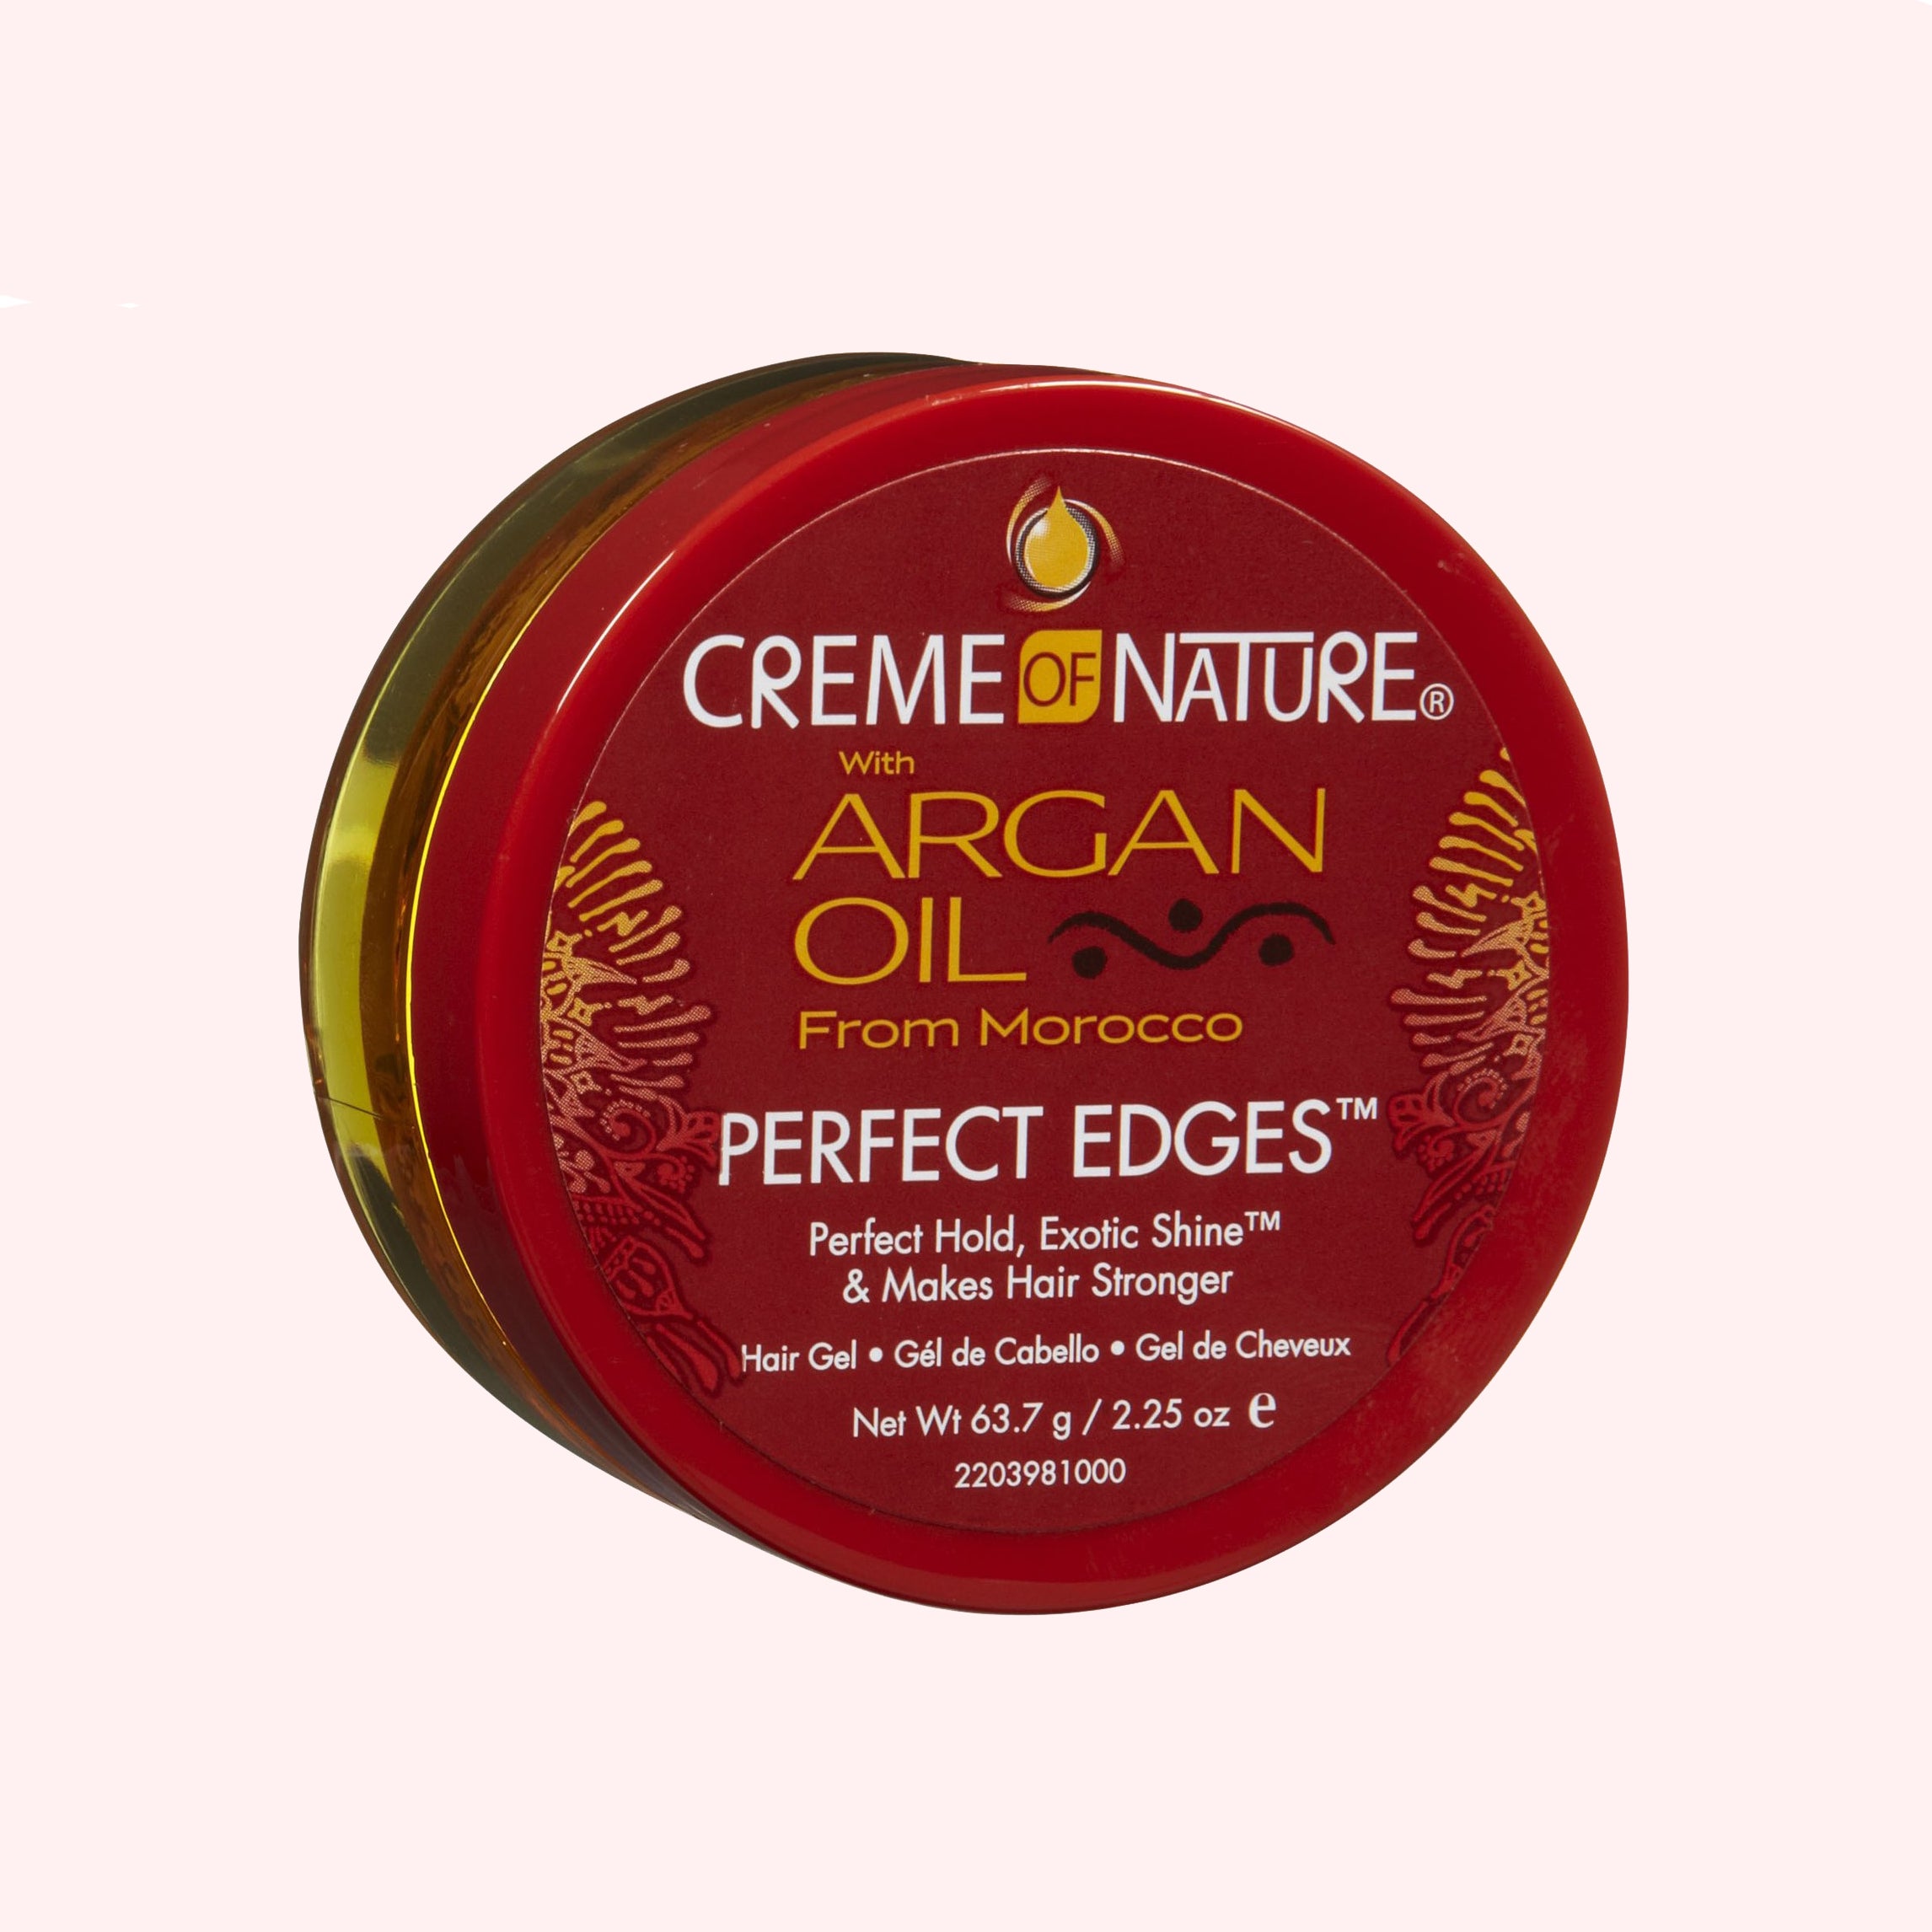 15 Products That Will Help You Achieve Laid Edges